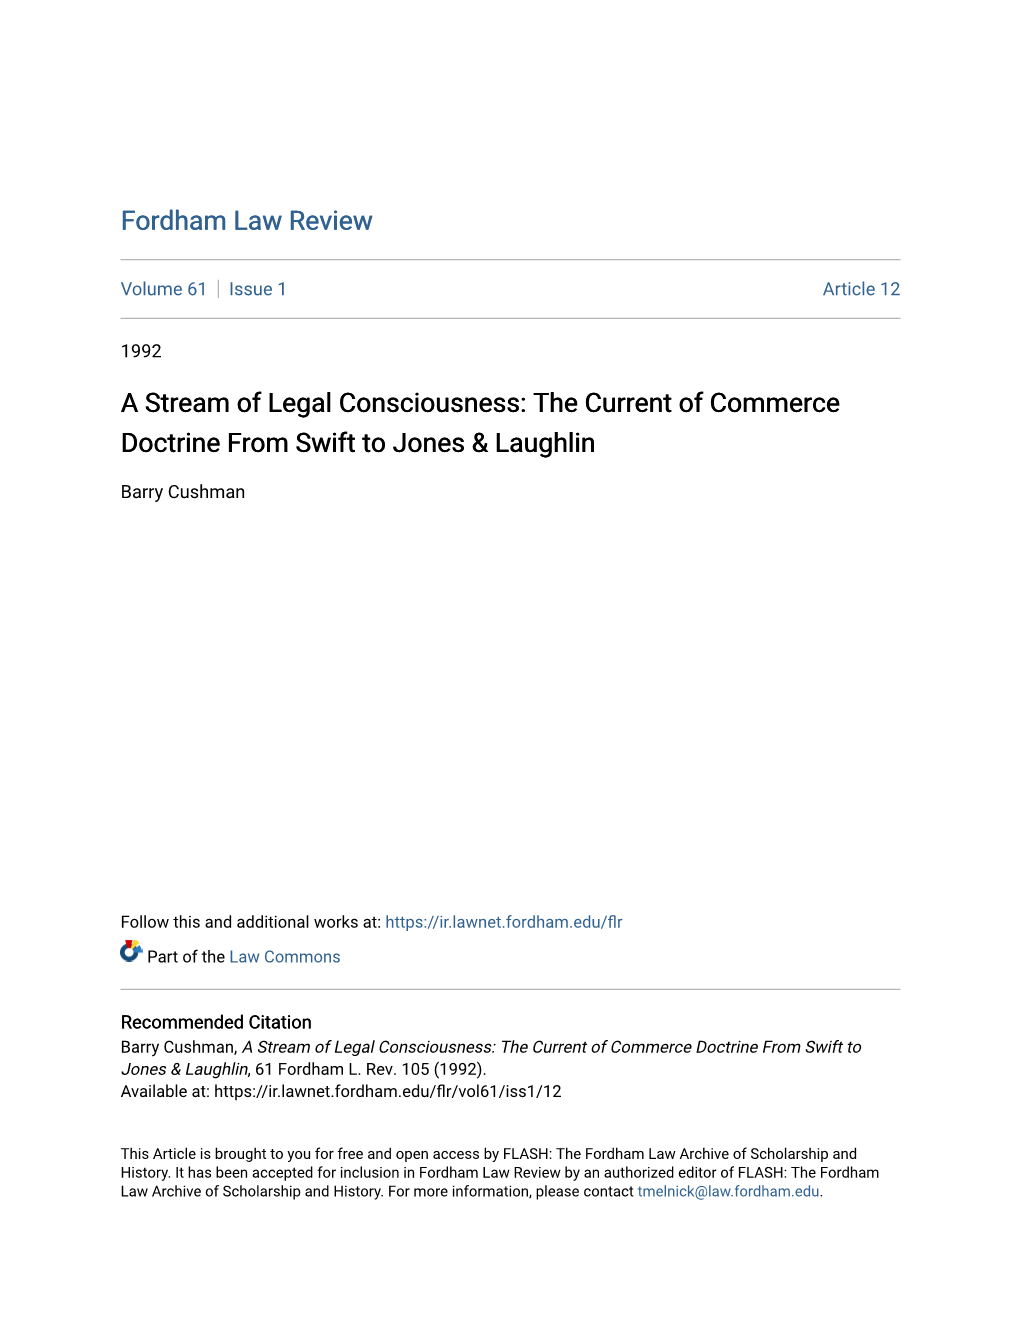 A Stream of Legal Consciousness: the Current of Commerce Doctrine from Swift to Jones & Laughlin